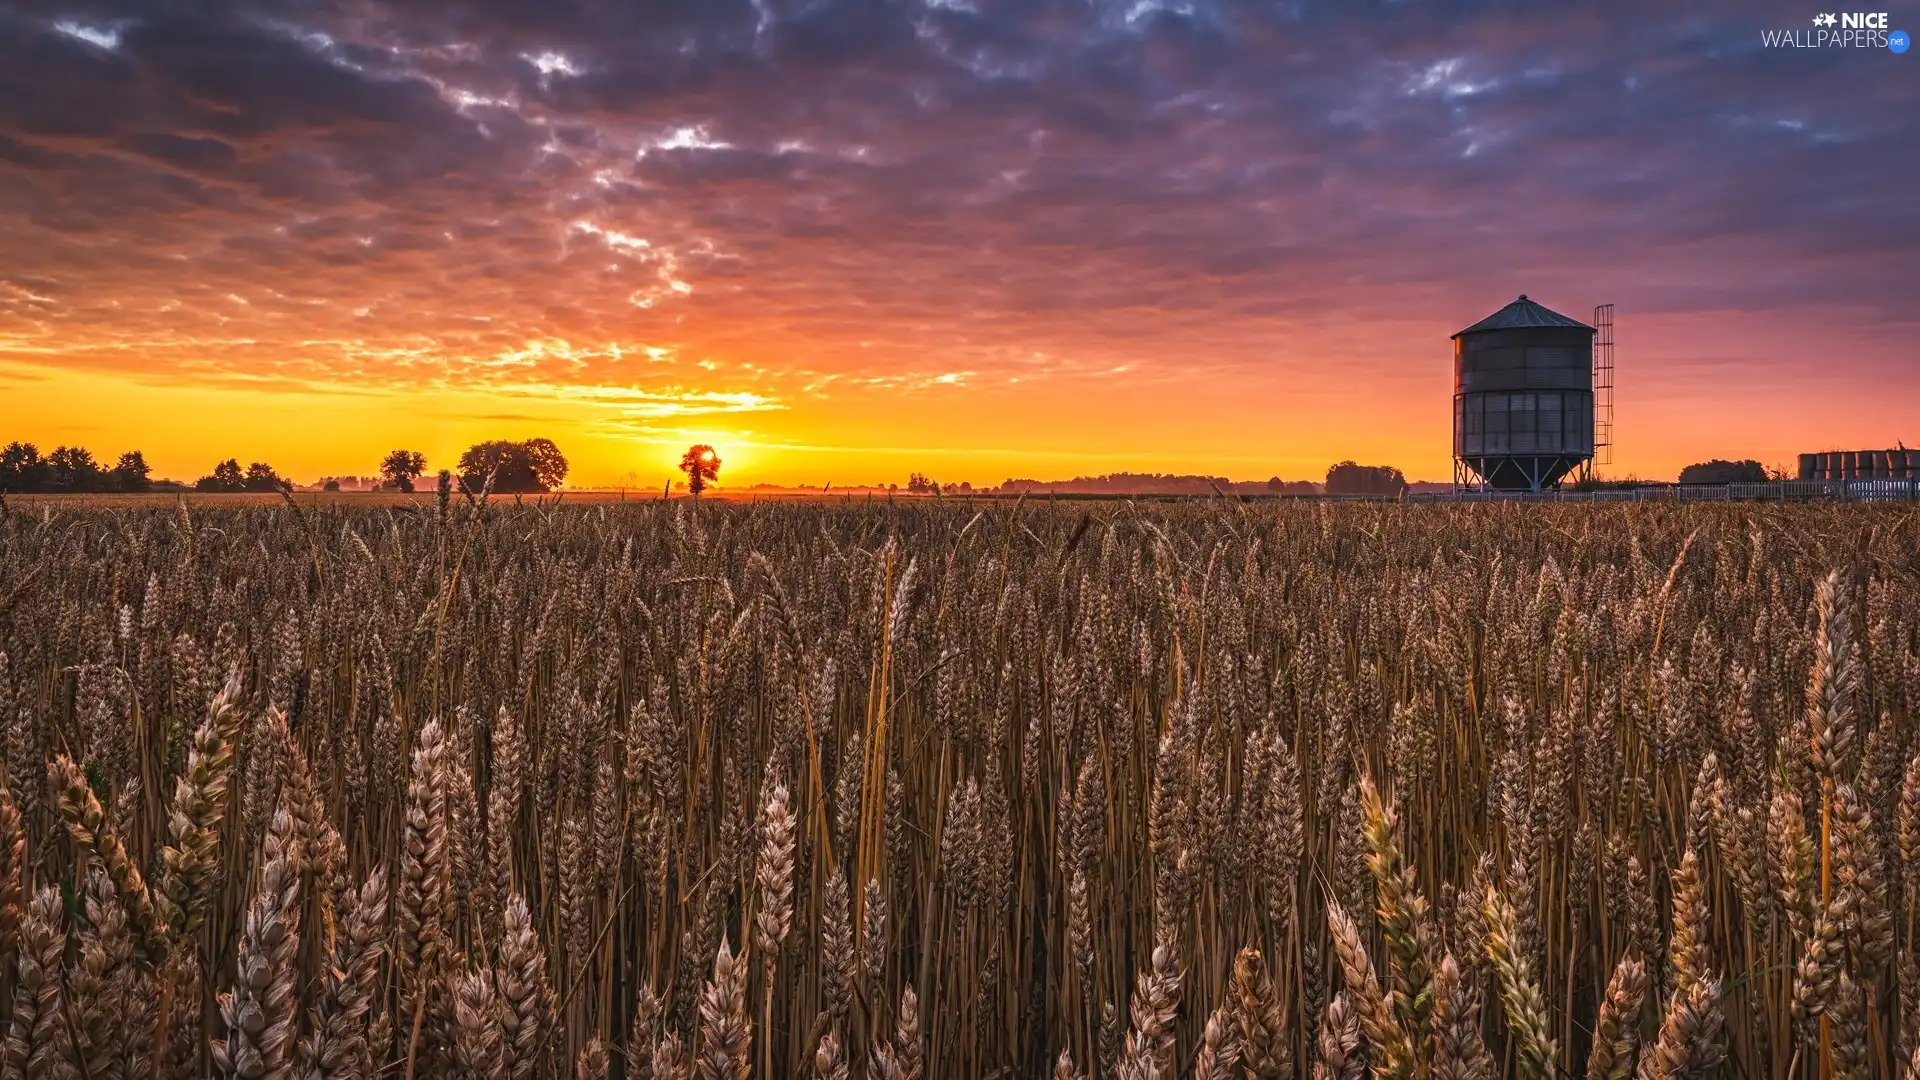 viewes, corn, clouds, trees, Field, Great Sunsets, silo